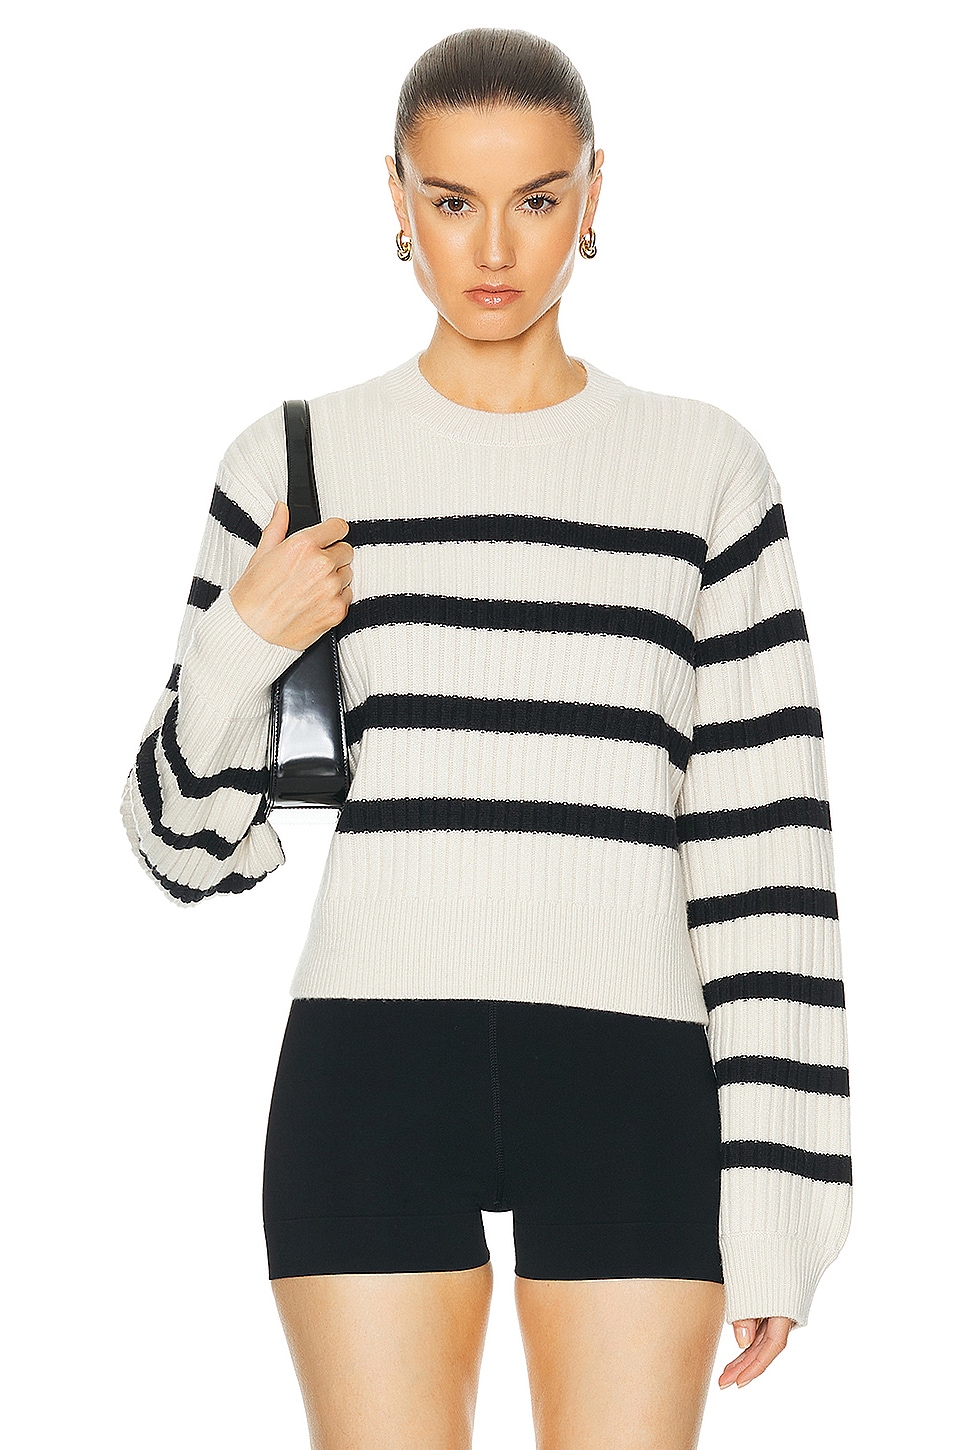 by Marianna Brial Striped Sweater in Cream